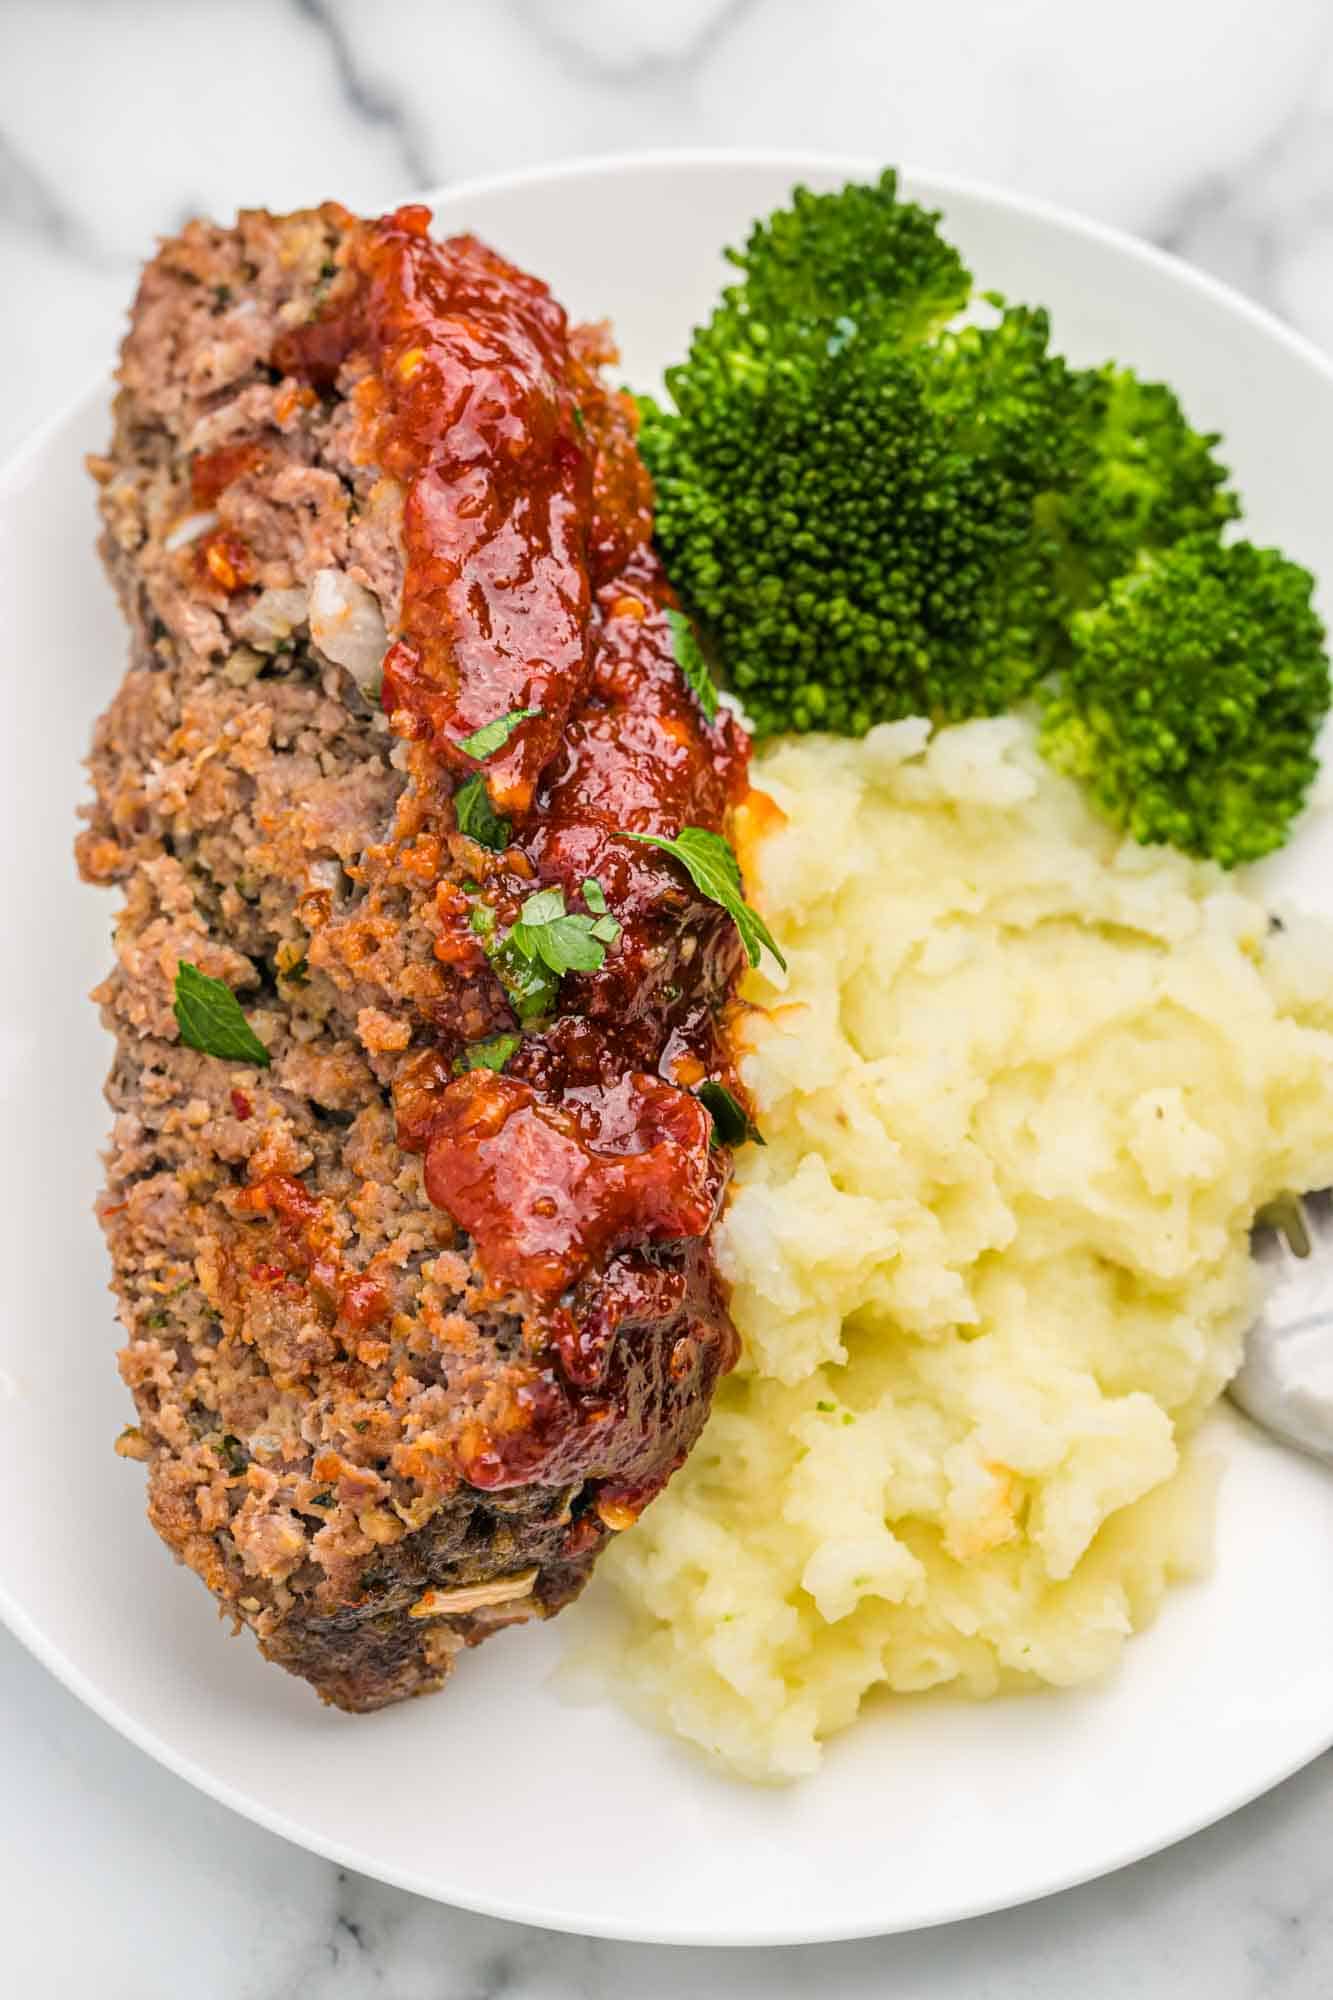 Slice of meatloaf served on a white plate with mashed potatoes and steamed broccoli